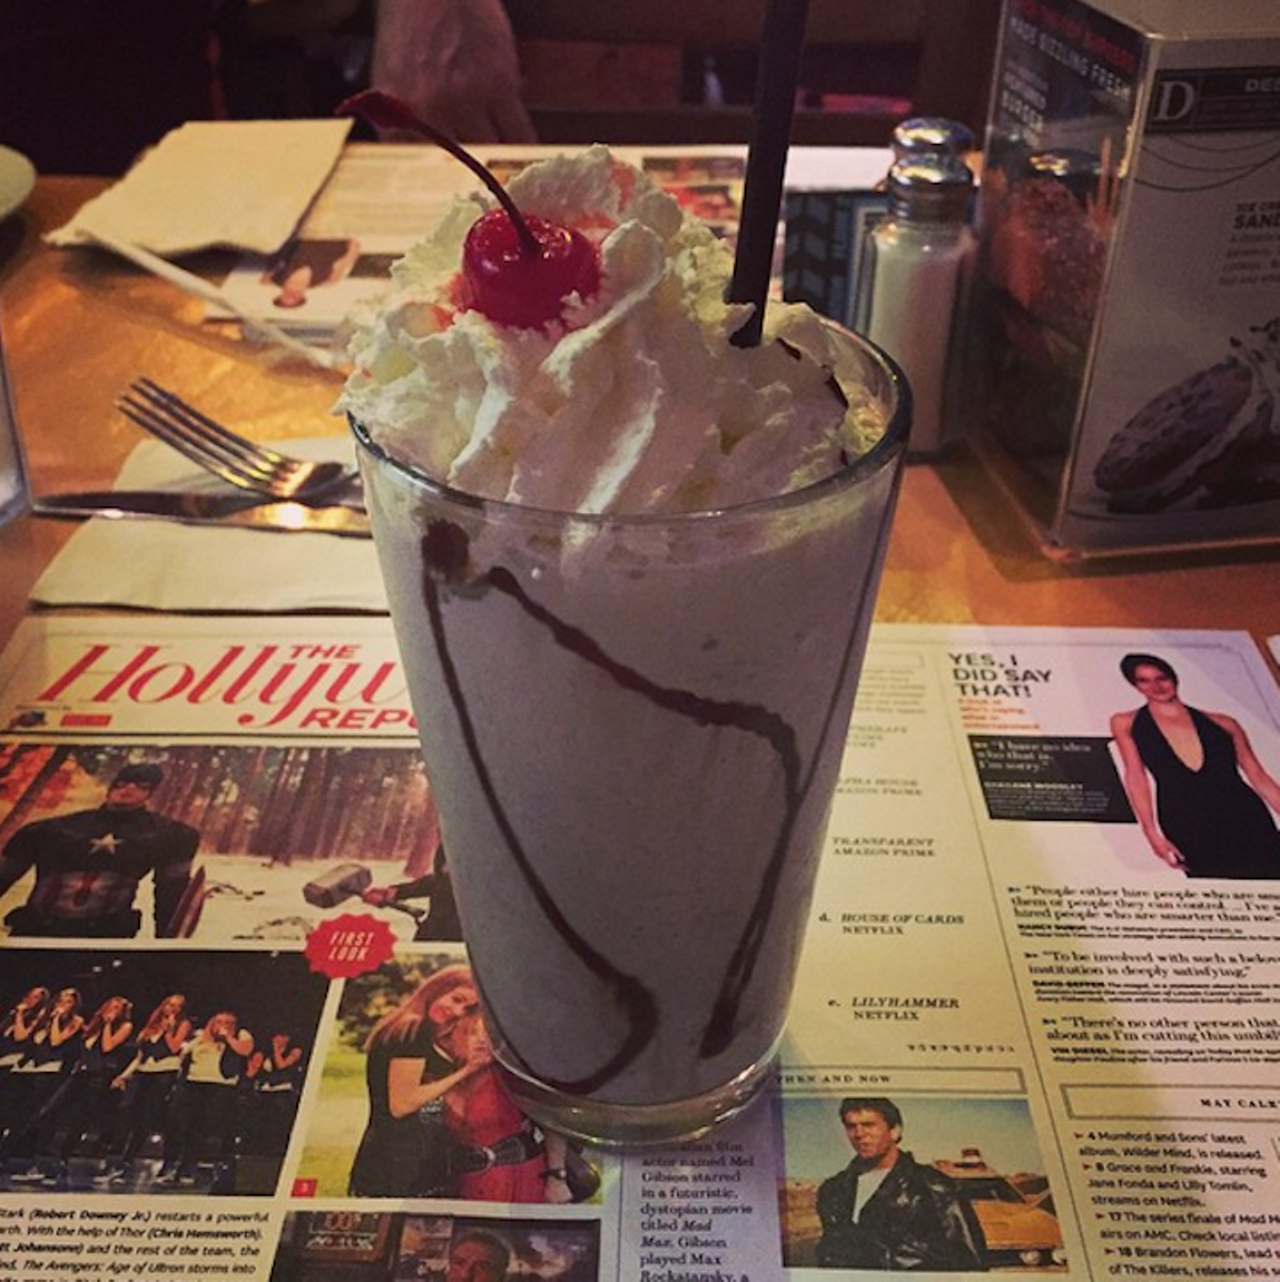 Planet Hollywood
1506 Buena Vista Drive; 407-827-7827
The food here isn&#146;t anything special, but at least there's something to make up for it. Selection is small and the chocolate malt might sound plain, but beauty can be found in simplicity.
Photo via elliotlancaster/Instagram